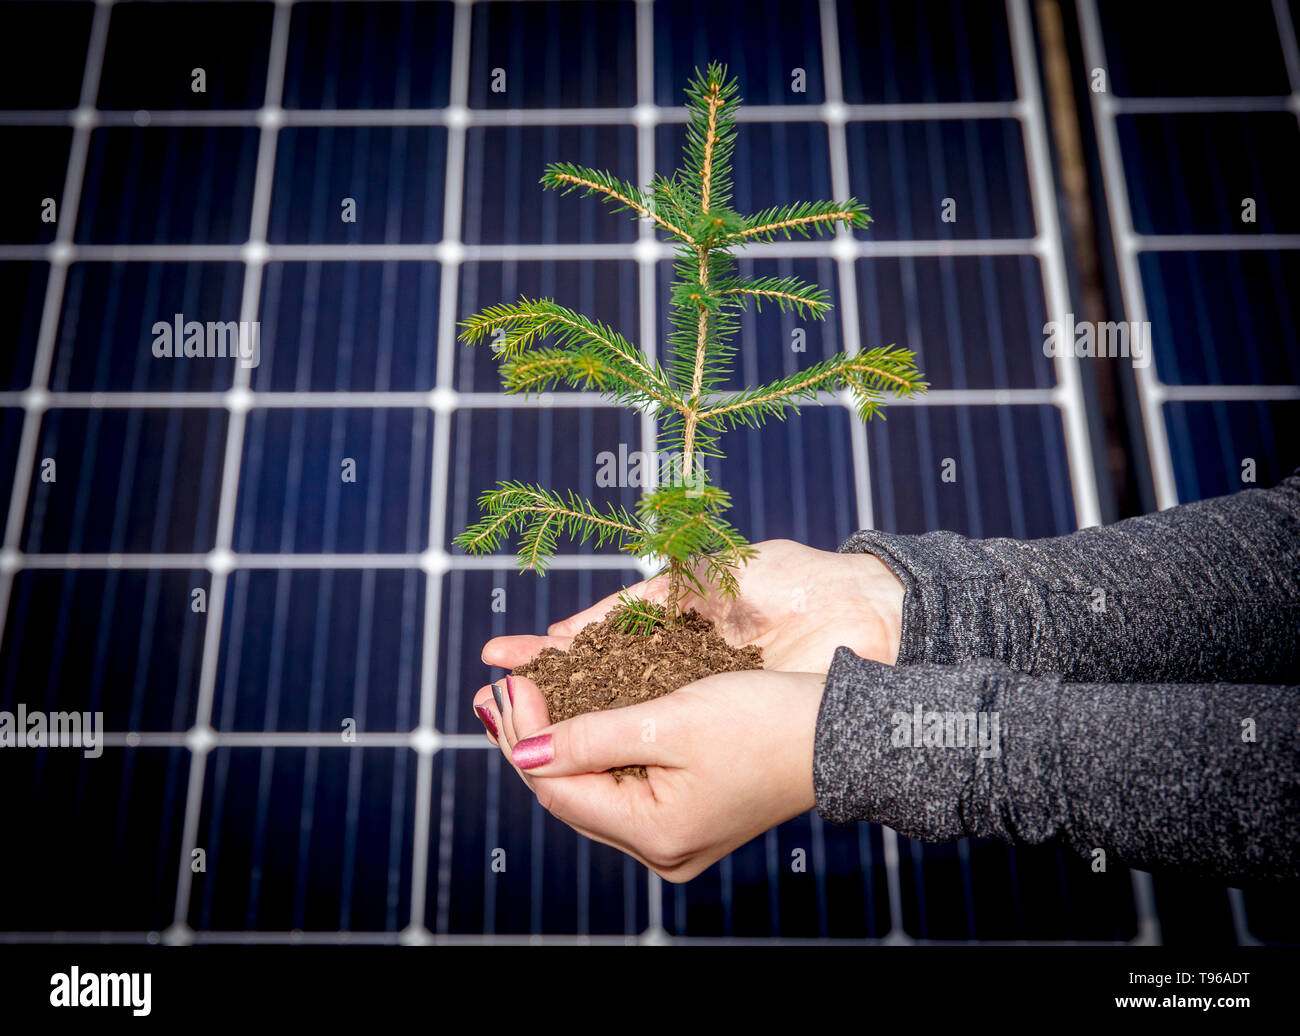 Nature friendly living green lifestyle, sustainable energy concept. Hands hold pile of soil and spruce tree, blue solar panel cells on the background, Stock Photo